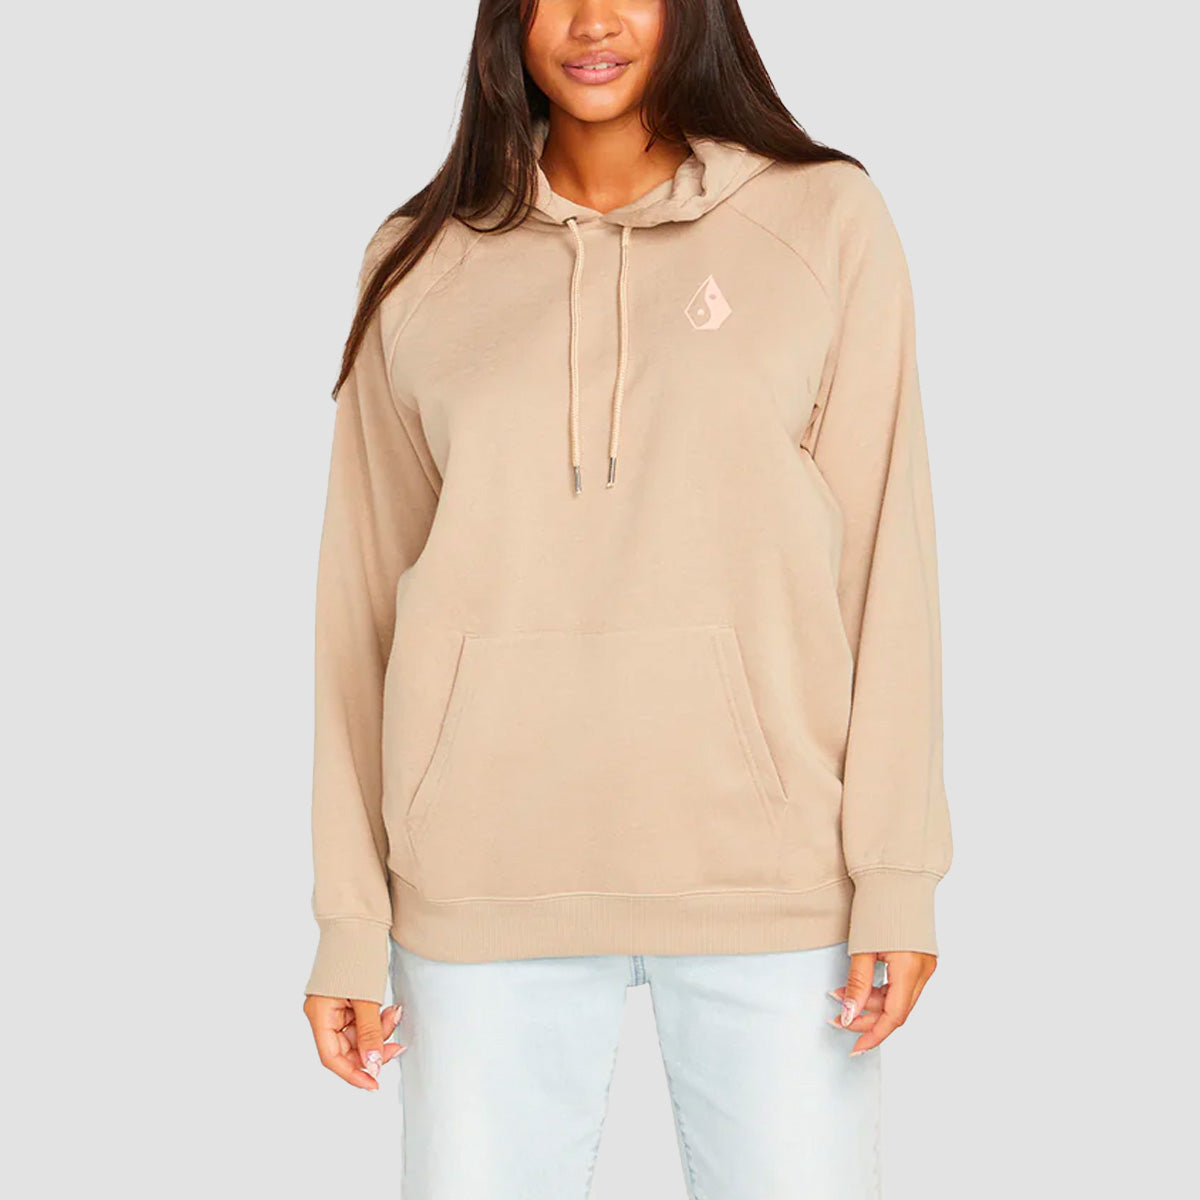 Volcom Truly Stoked Team Vitals Skate BF Pullover Hoodie Taupe - Womens